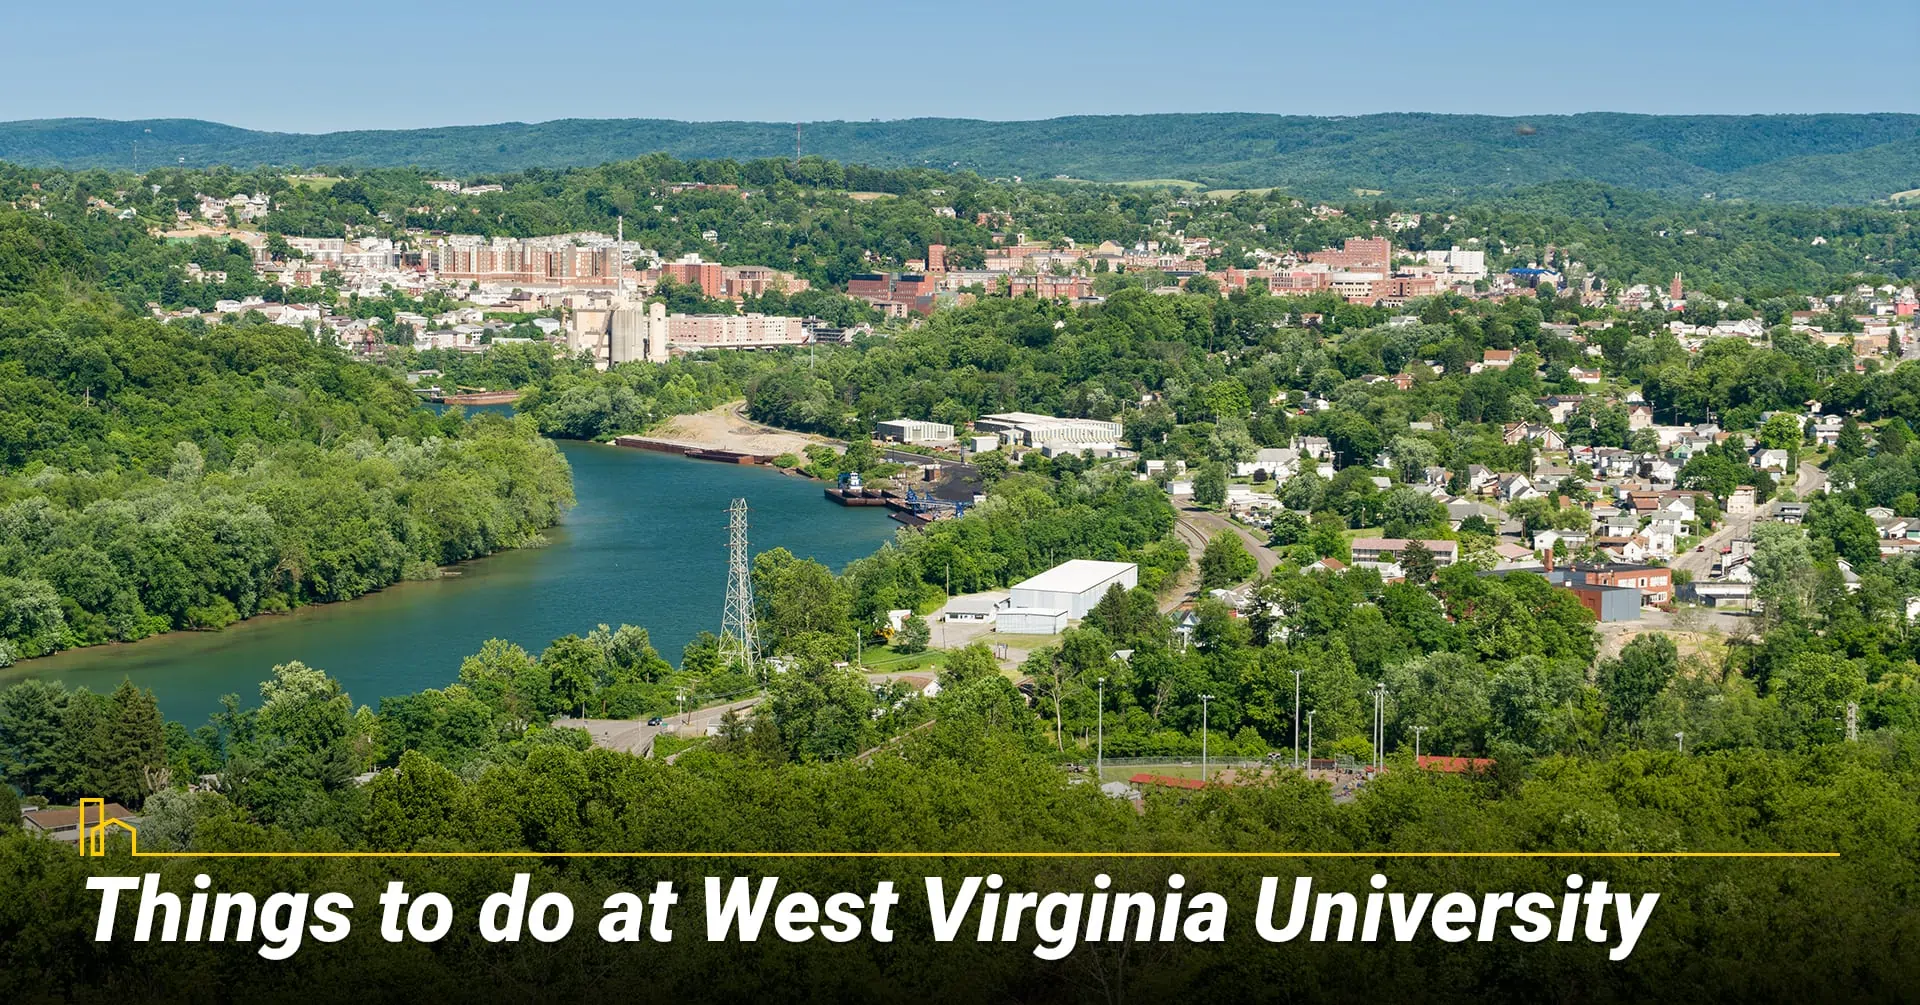 THINGS TO DO AT WEST VIRGINIA UNIVERSITY